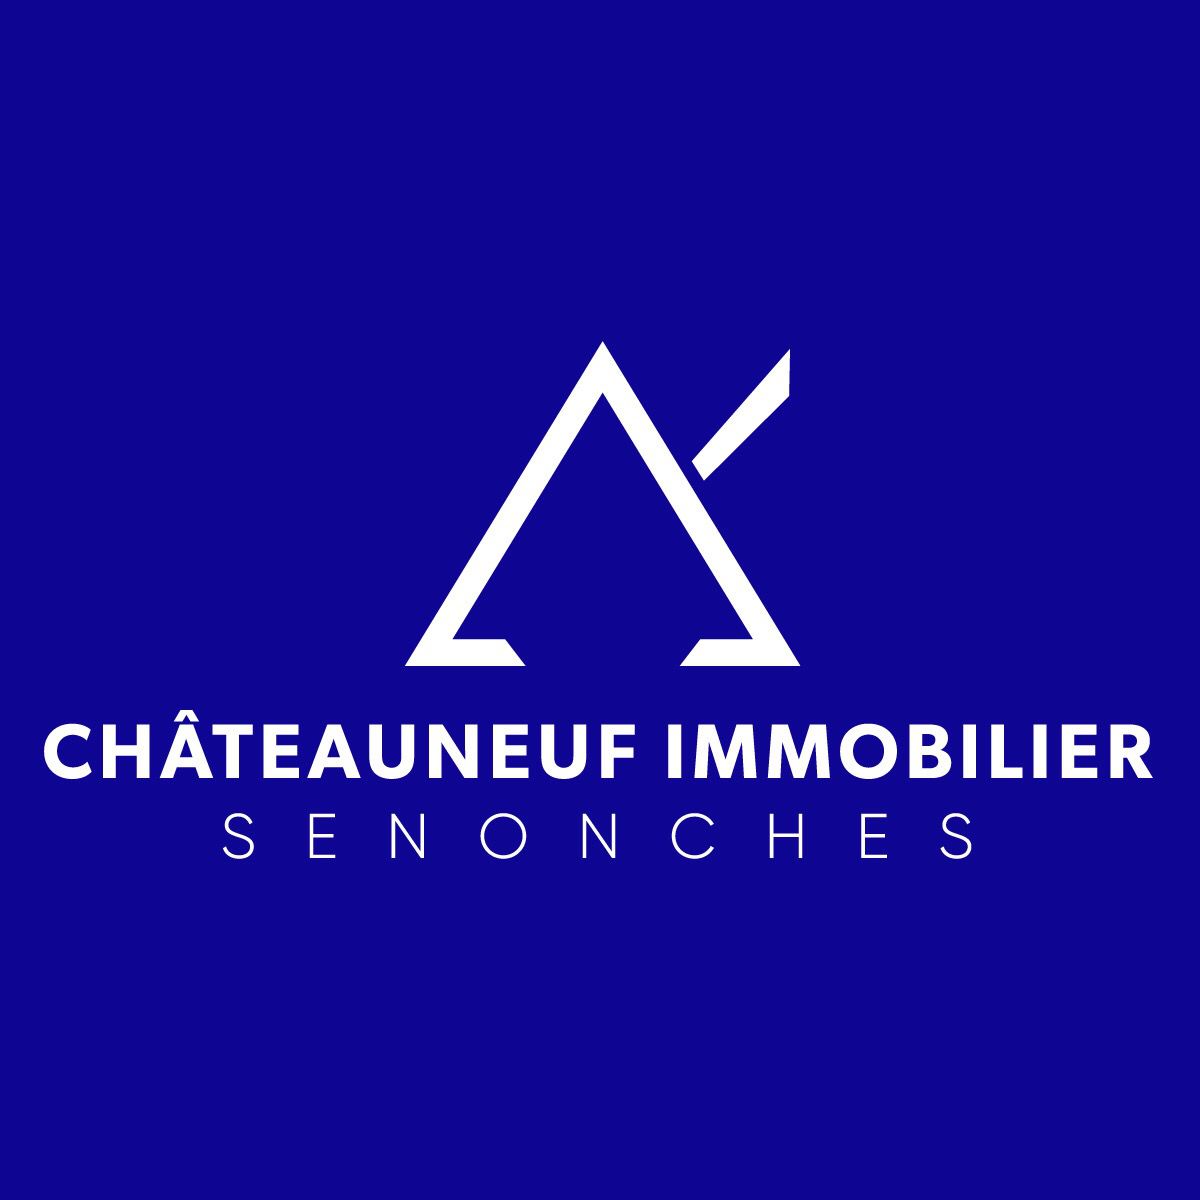 Chateauneuf Immobilier SAS agence immobilière